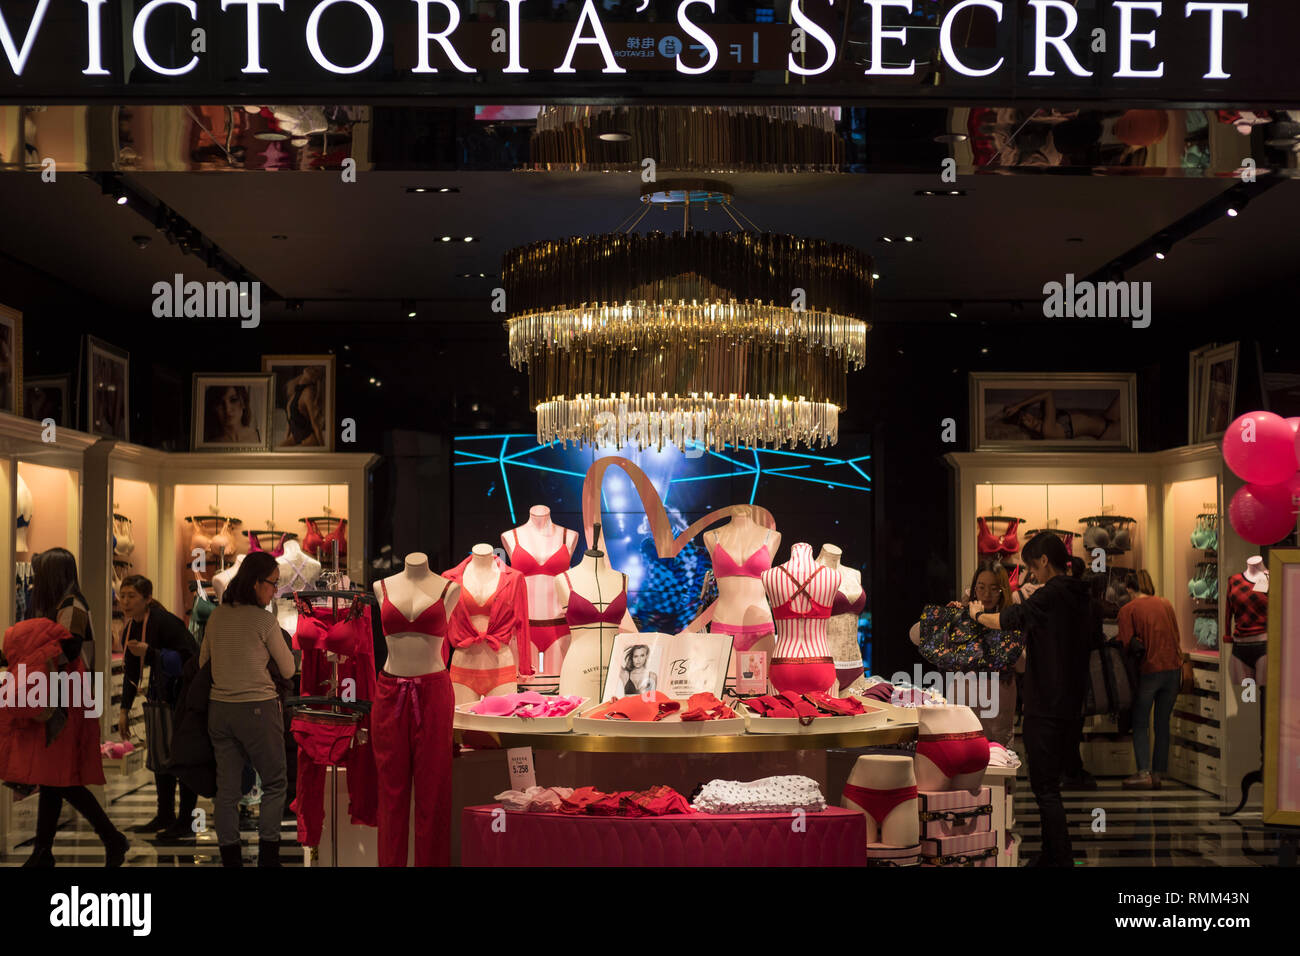 Victorias secret hi-res stock photography and images - Alamy